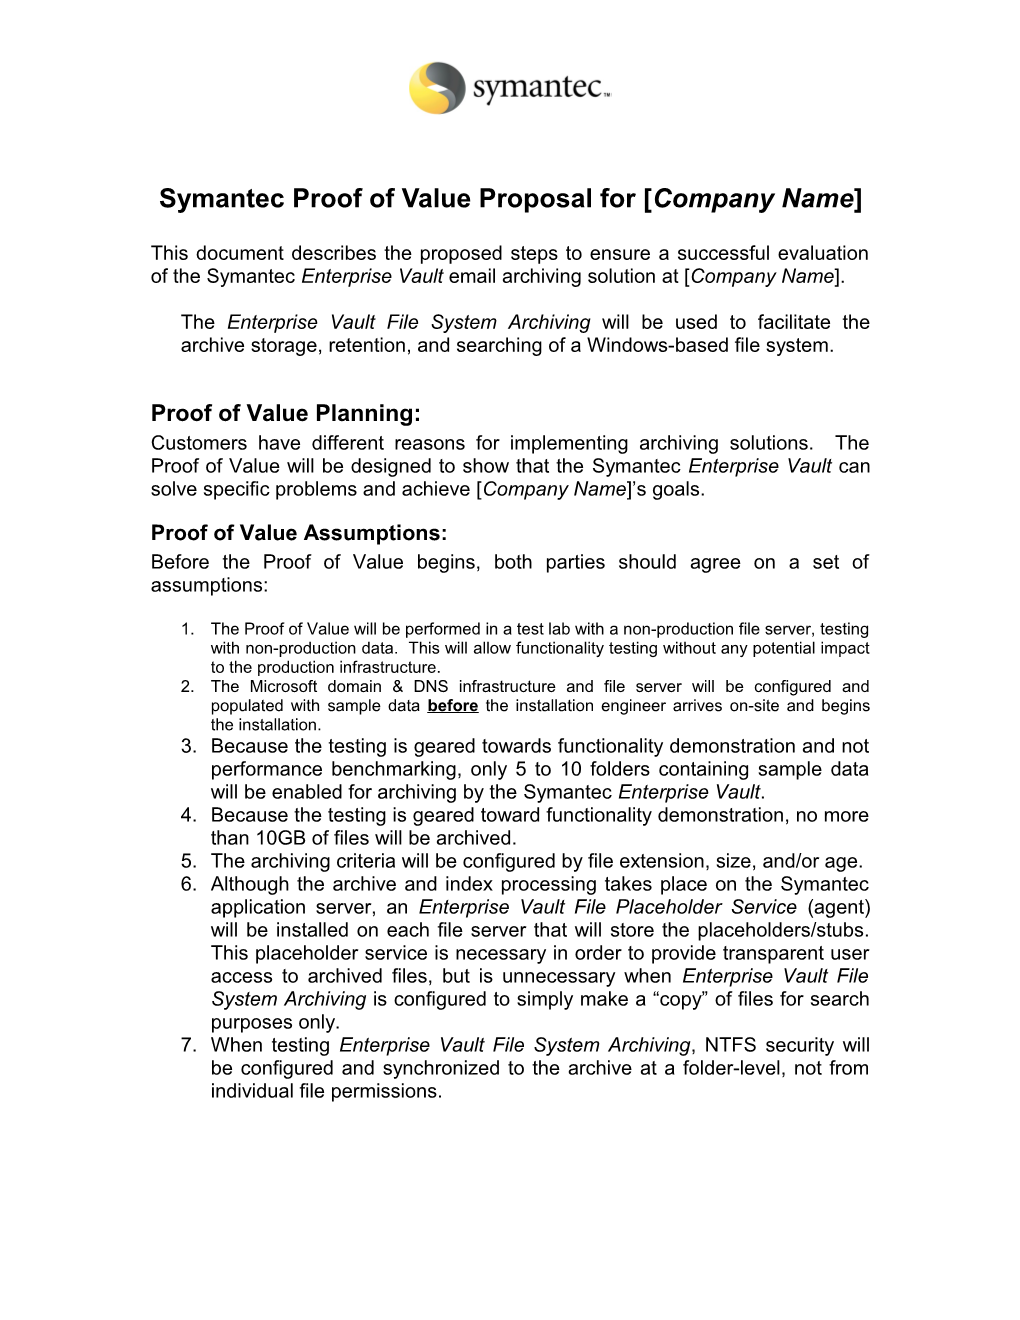 Symantec Proof of Value Proposal for Company Name